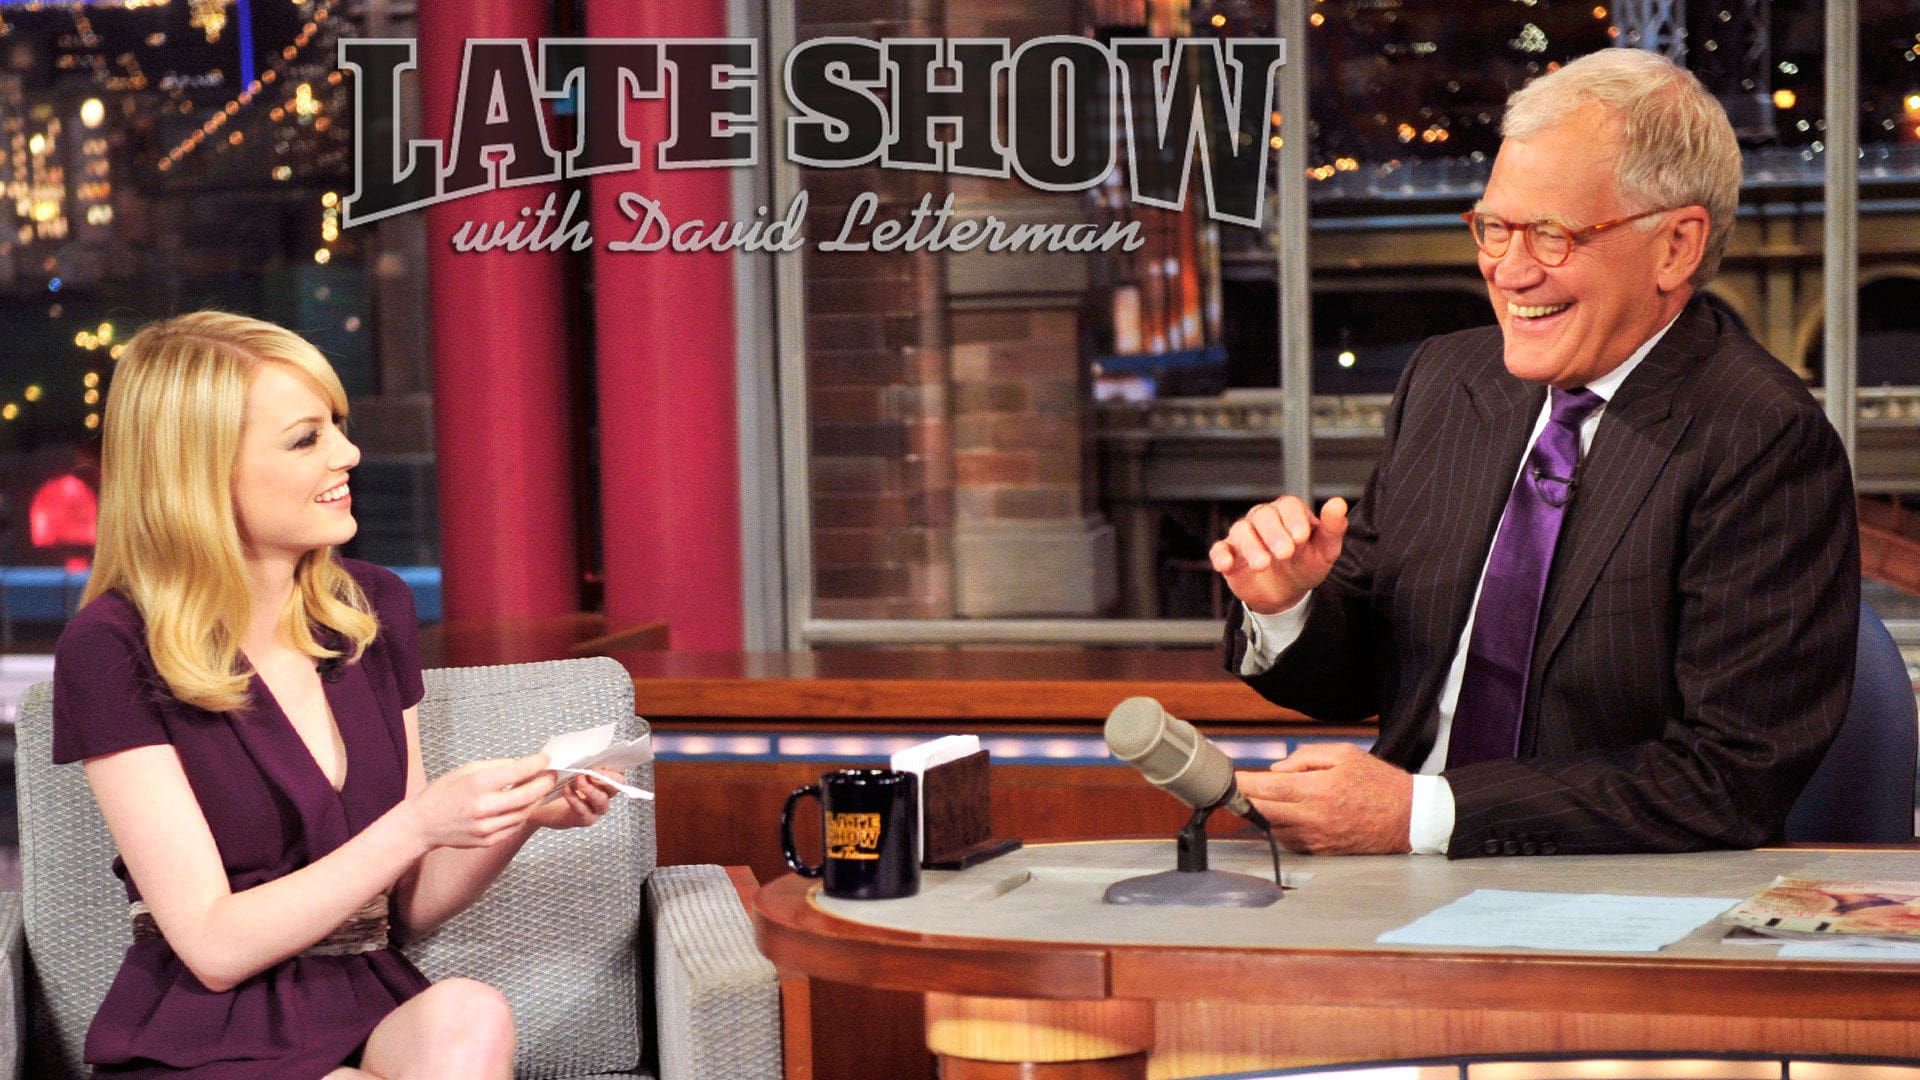 Late Show with David Letterman - Season 22 Episode 15